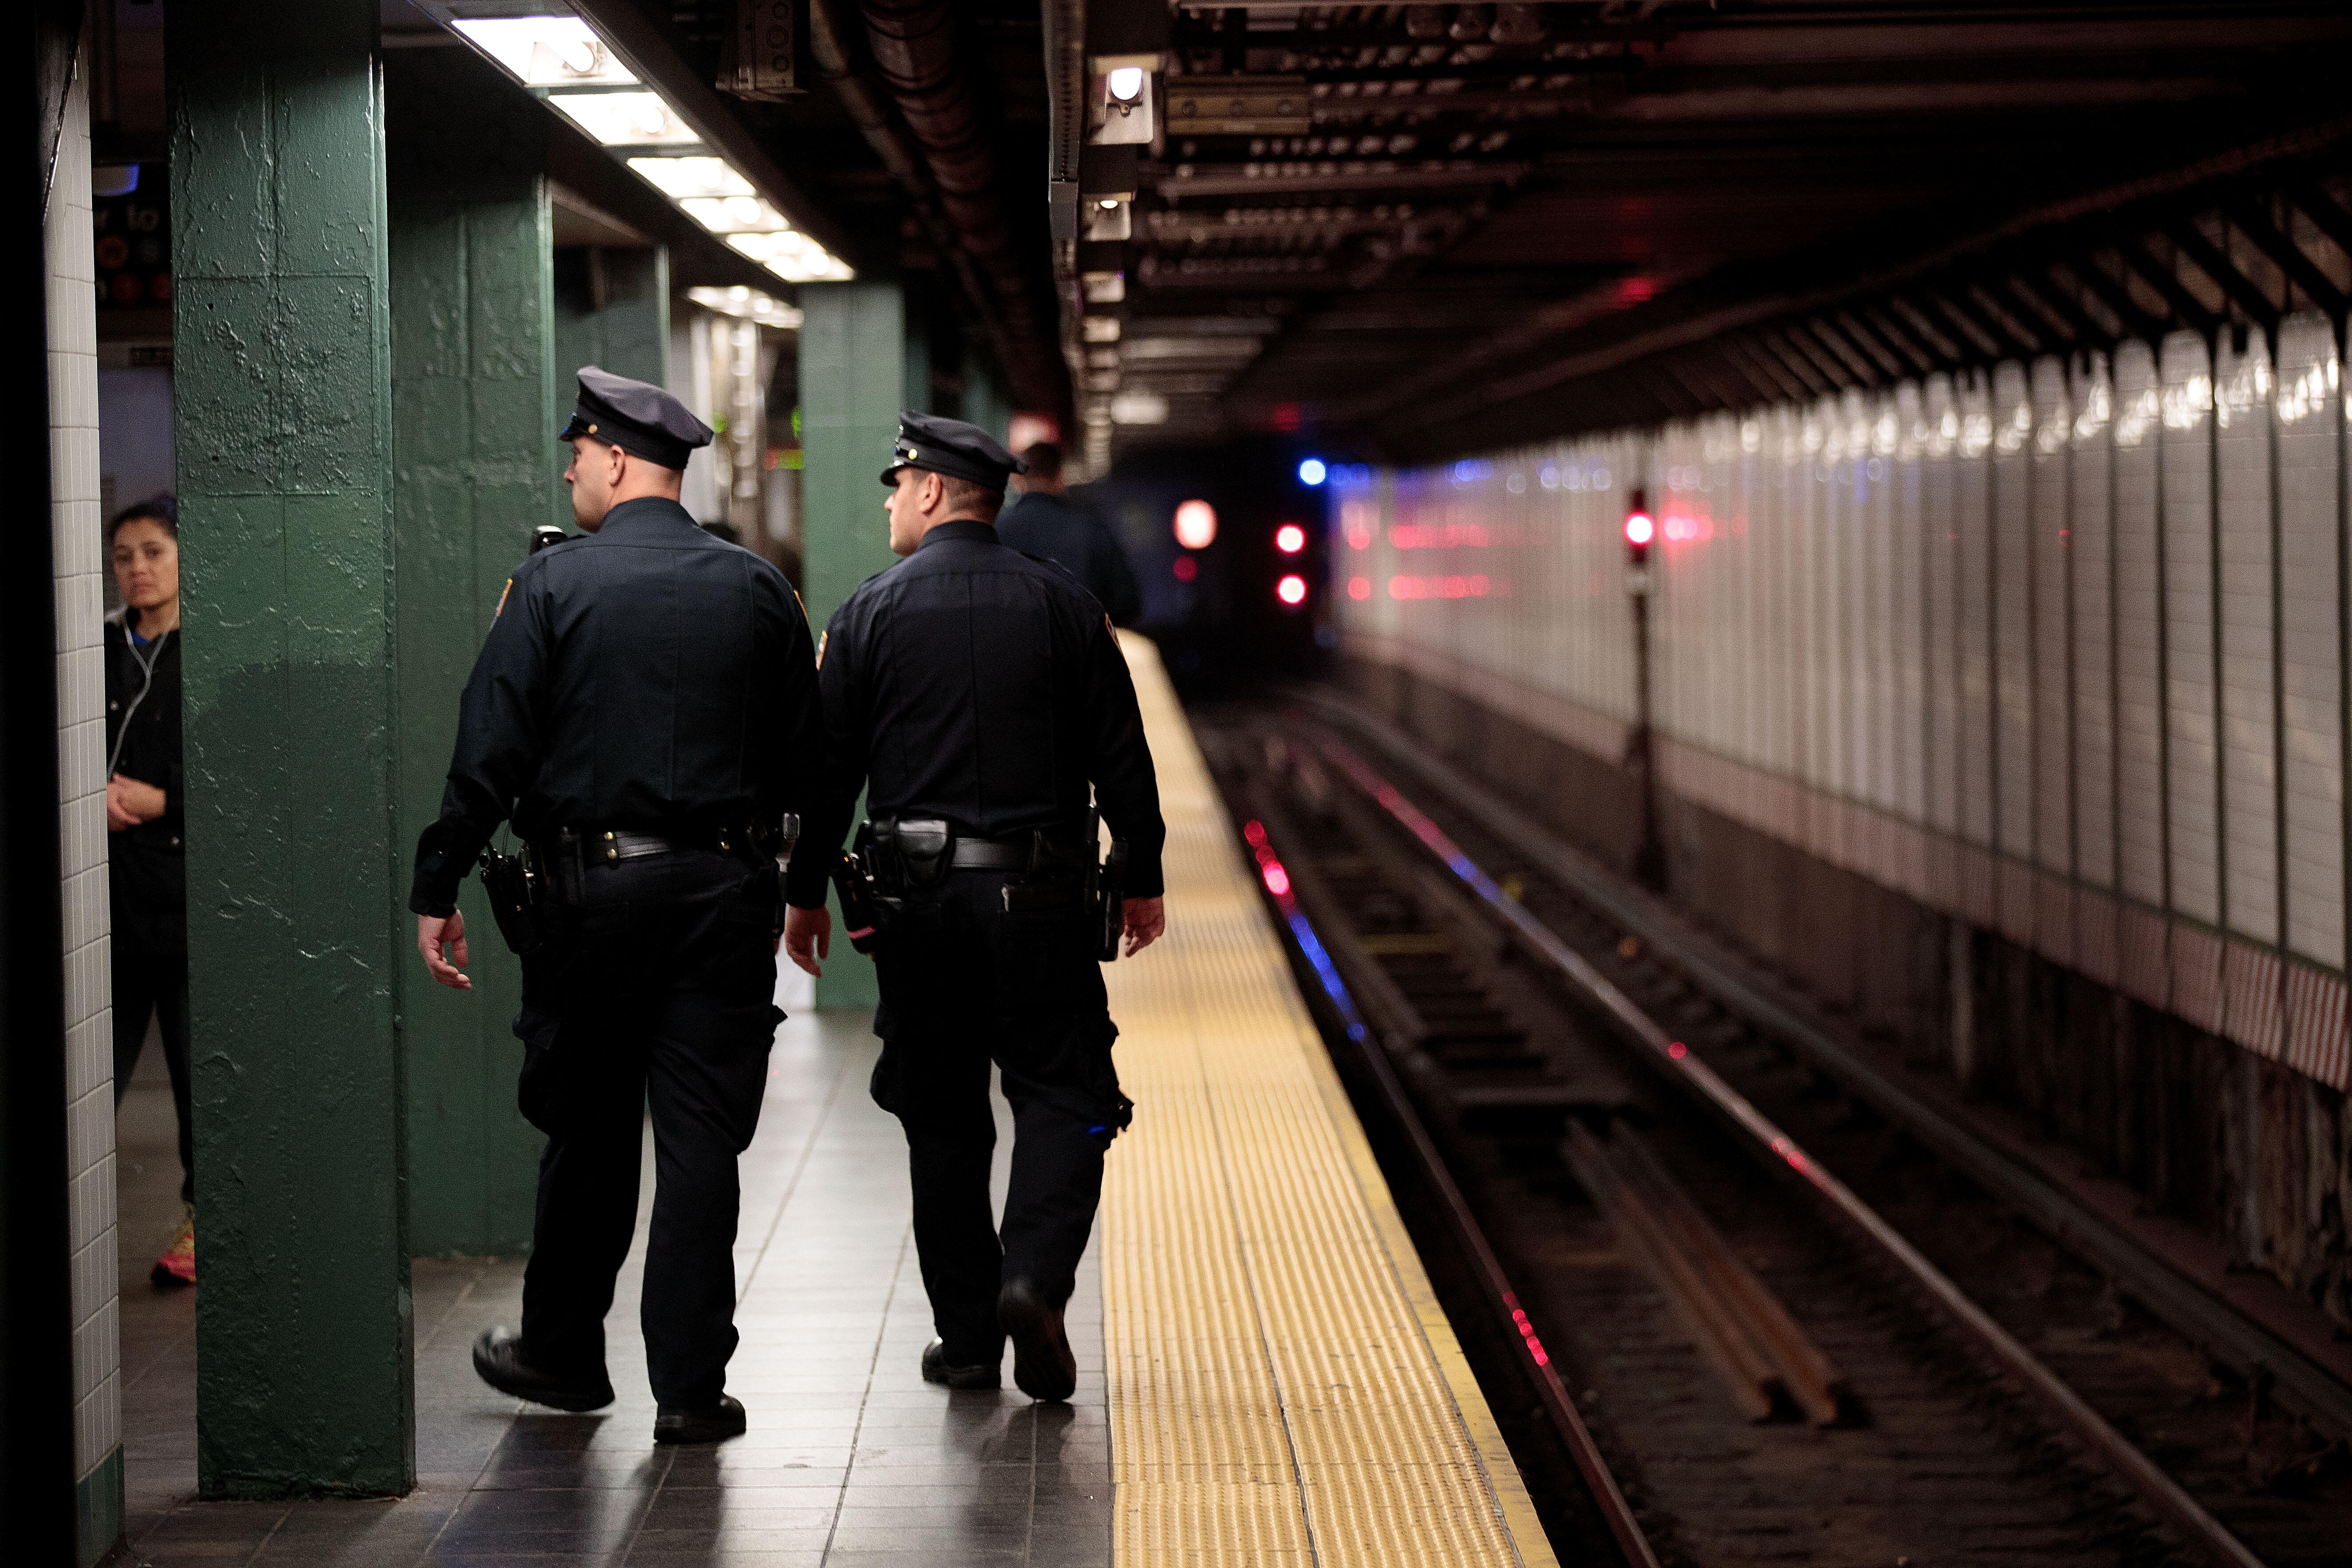 NEW YORK, NY - NOVEMBER 7: Members of the New York City Police patrol a subway station in Times Square, November 7, 2016 in New York City. With both presidential candidates holding their election night events in New York City, the NYPD has stepped up secu